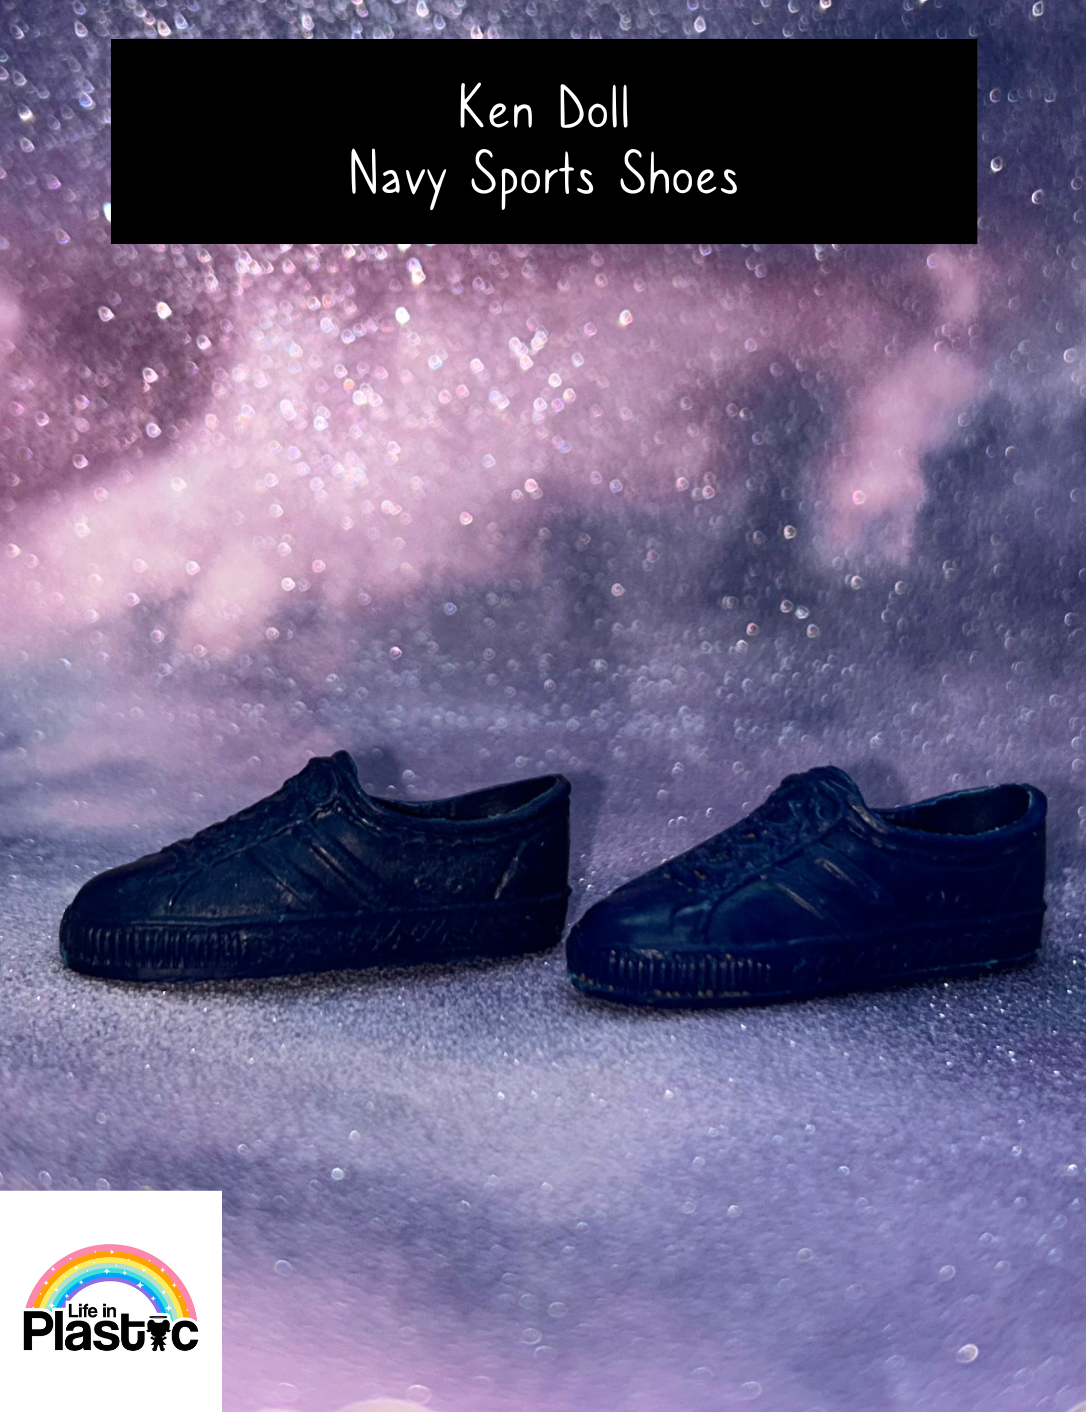 Ken Doll Navy Sports Shoes